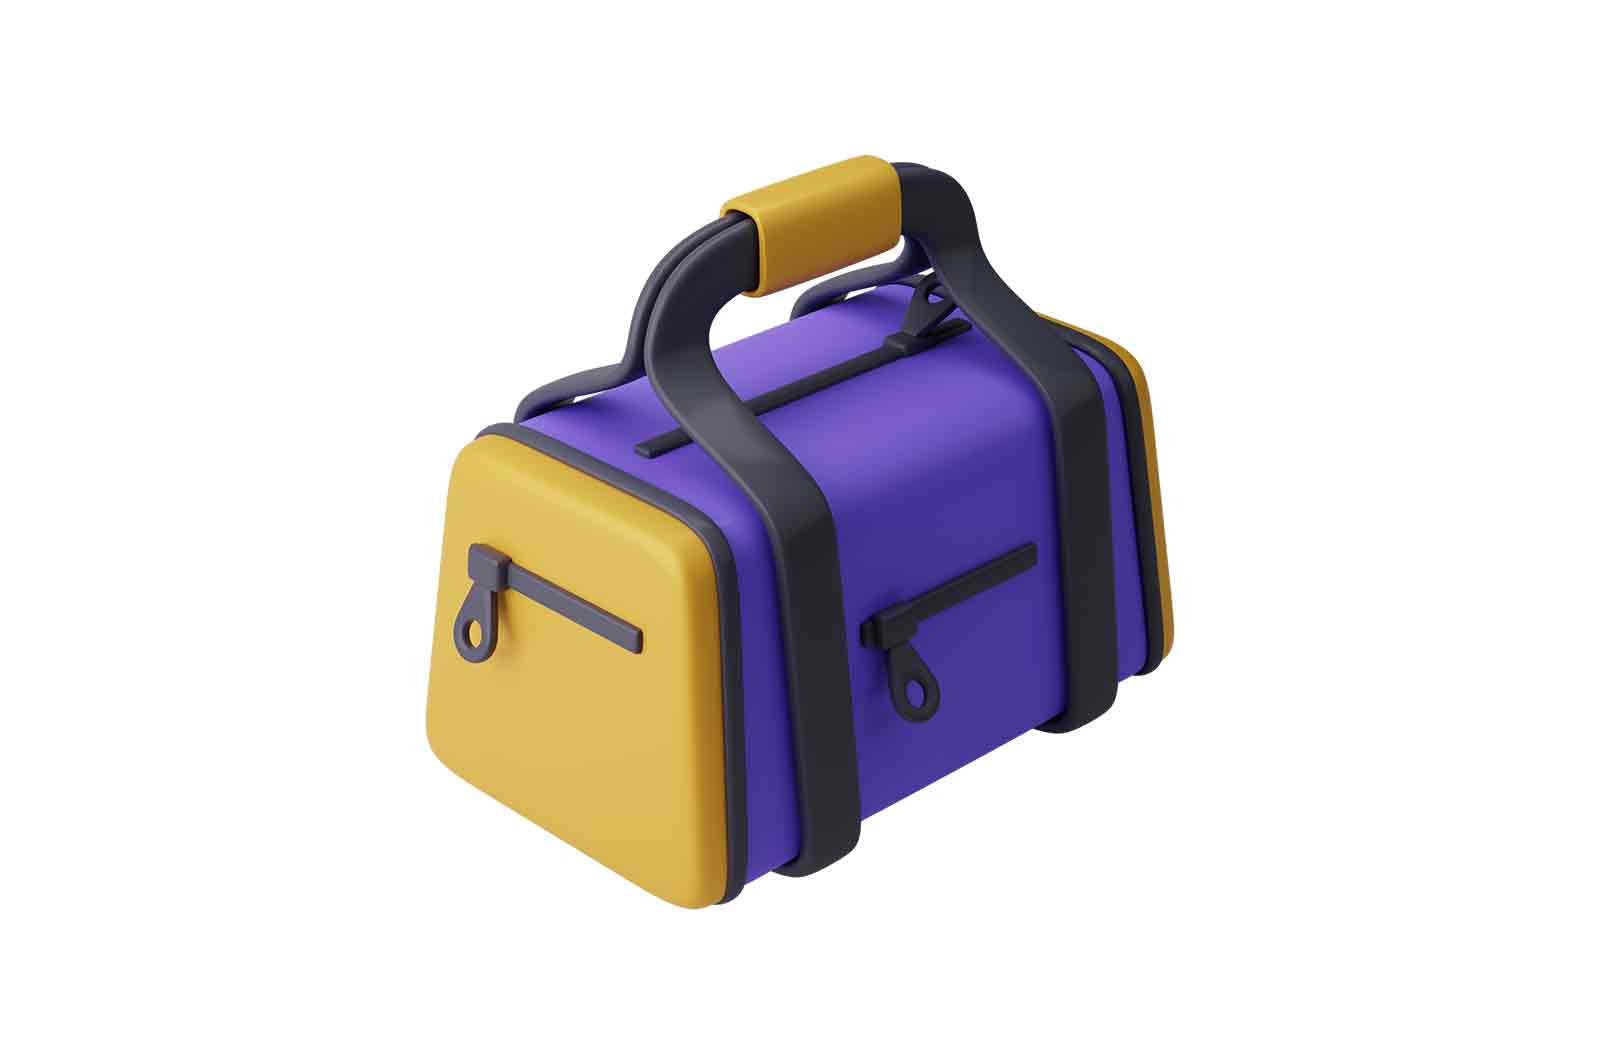 Sports bag for workouts 3d rendered illustration. Equipment for fitness and sport or travel luggage. Accessories concept